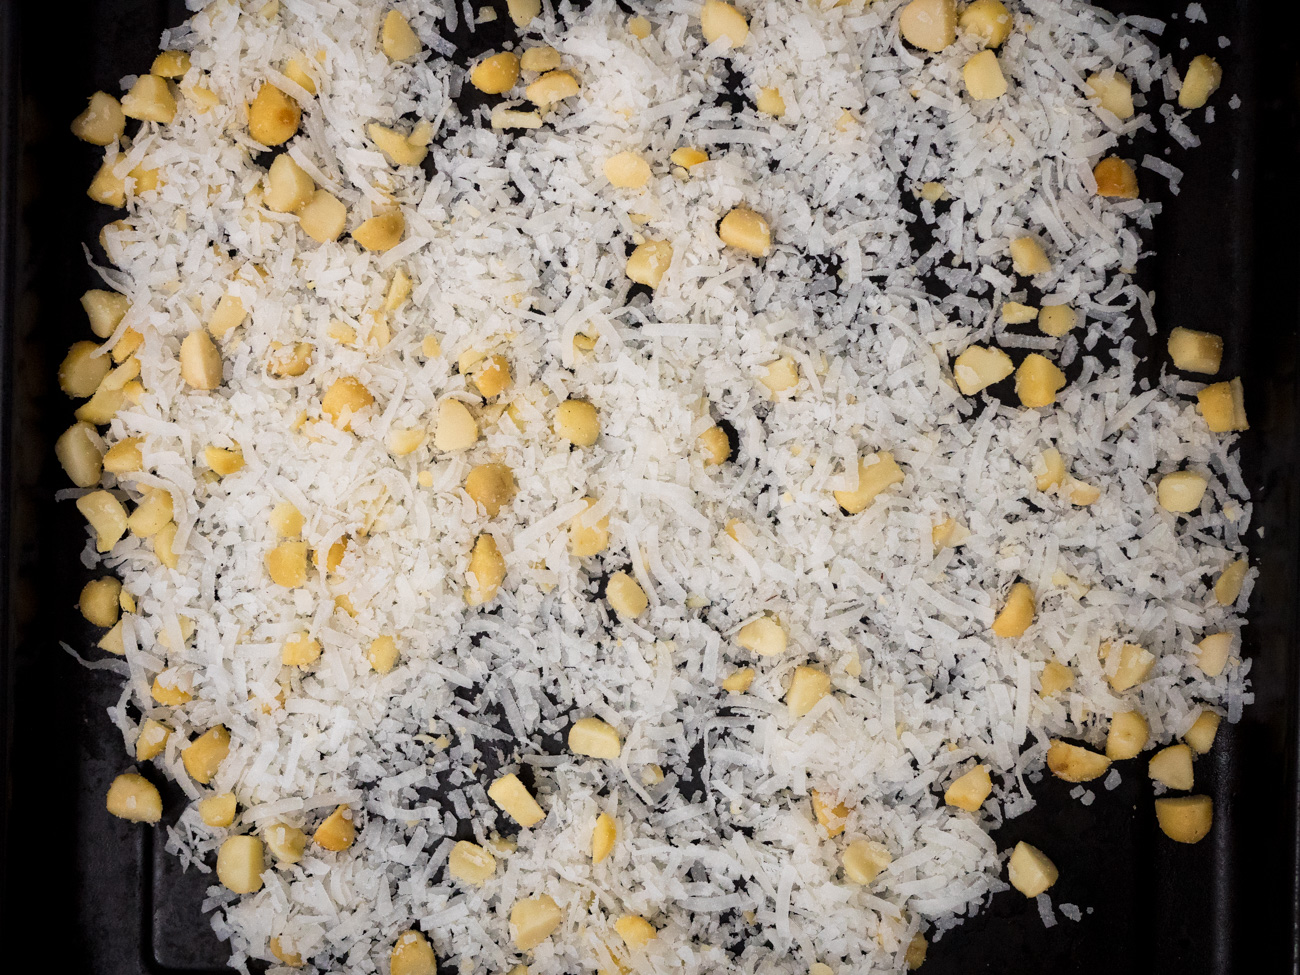 Prepare the garnish first by turning on the broiler and spreading 1/2 cup coconut flakes and 1/4 cup rough chopped macadamia nuts on a cookie sheet.